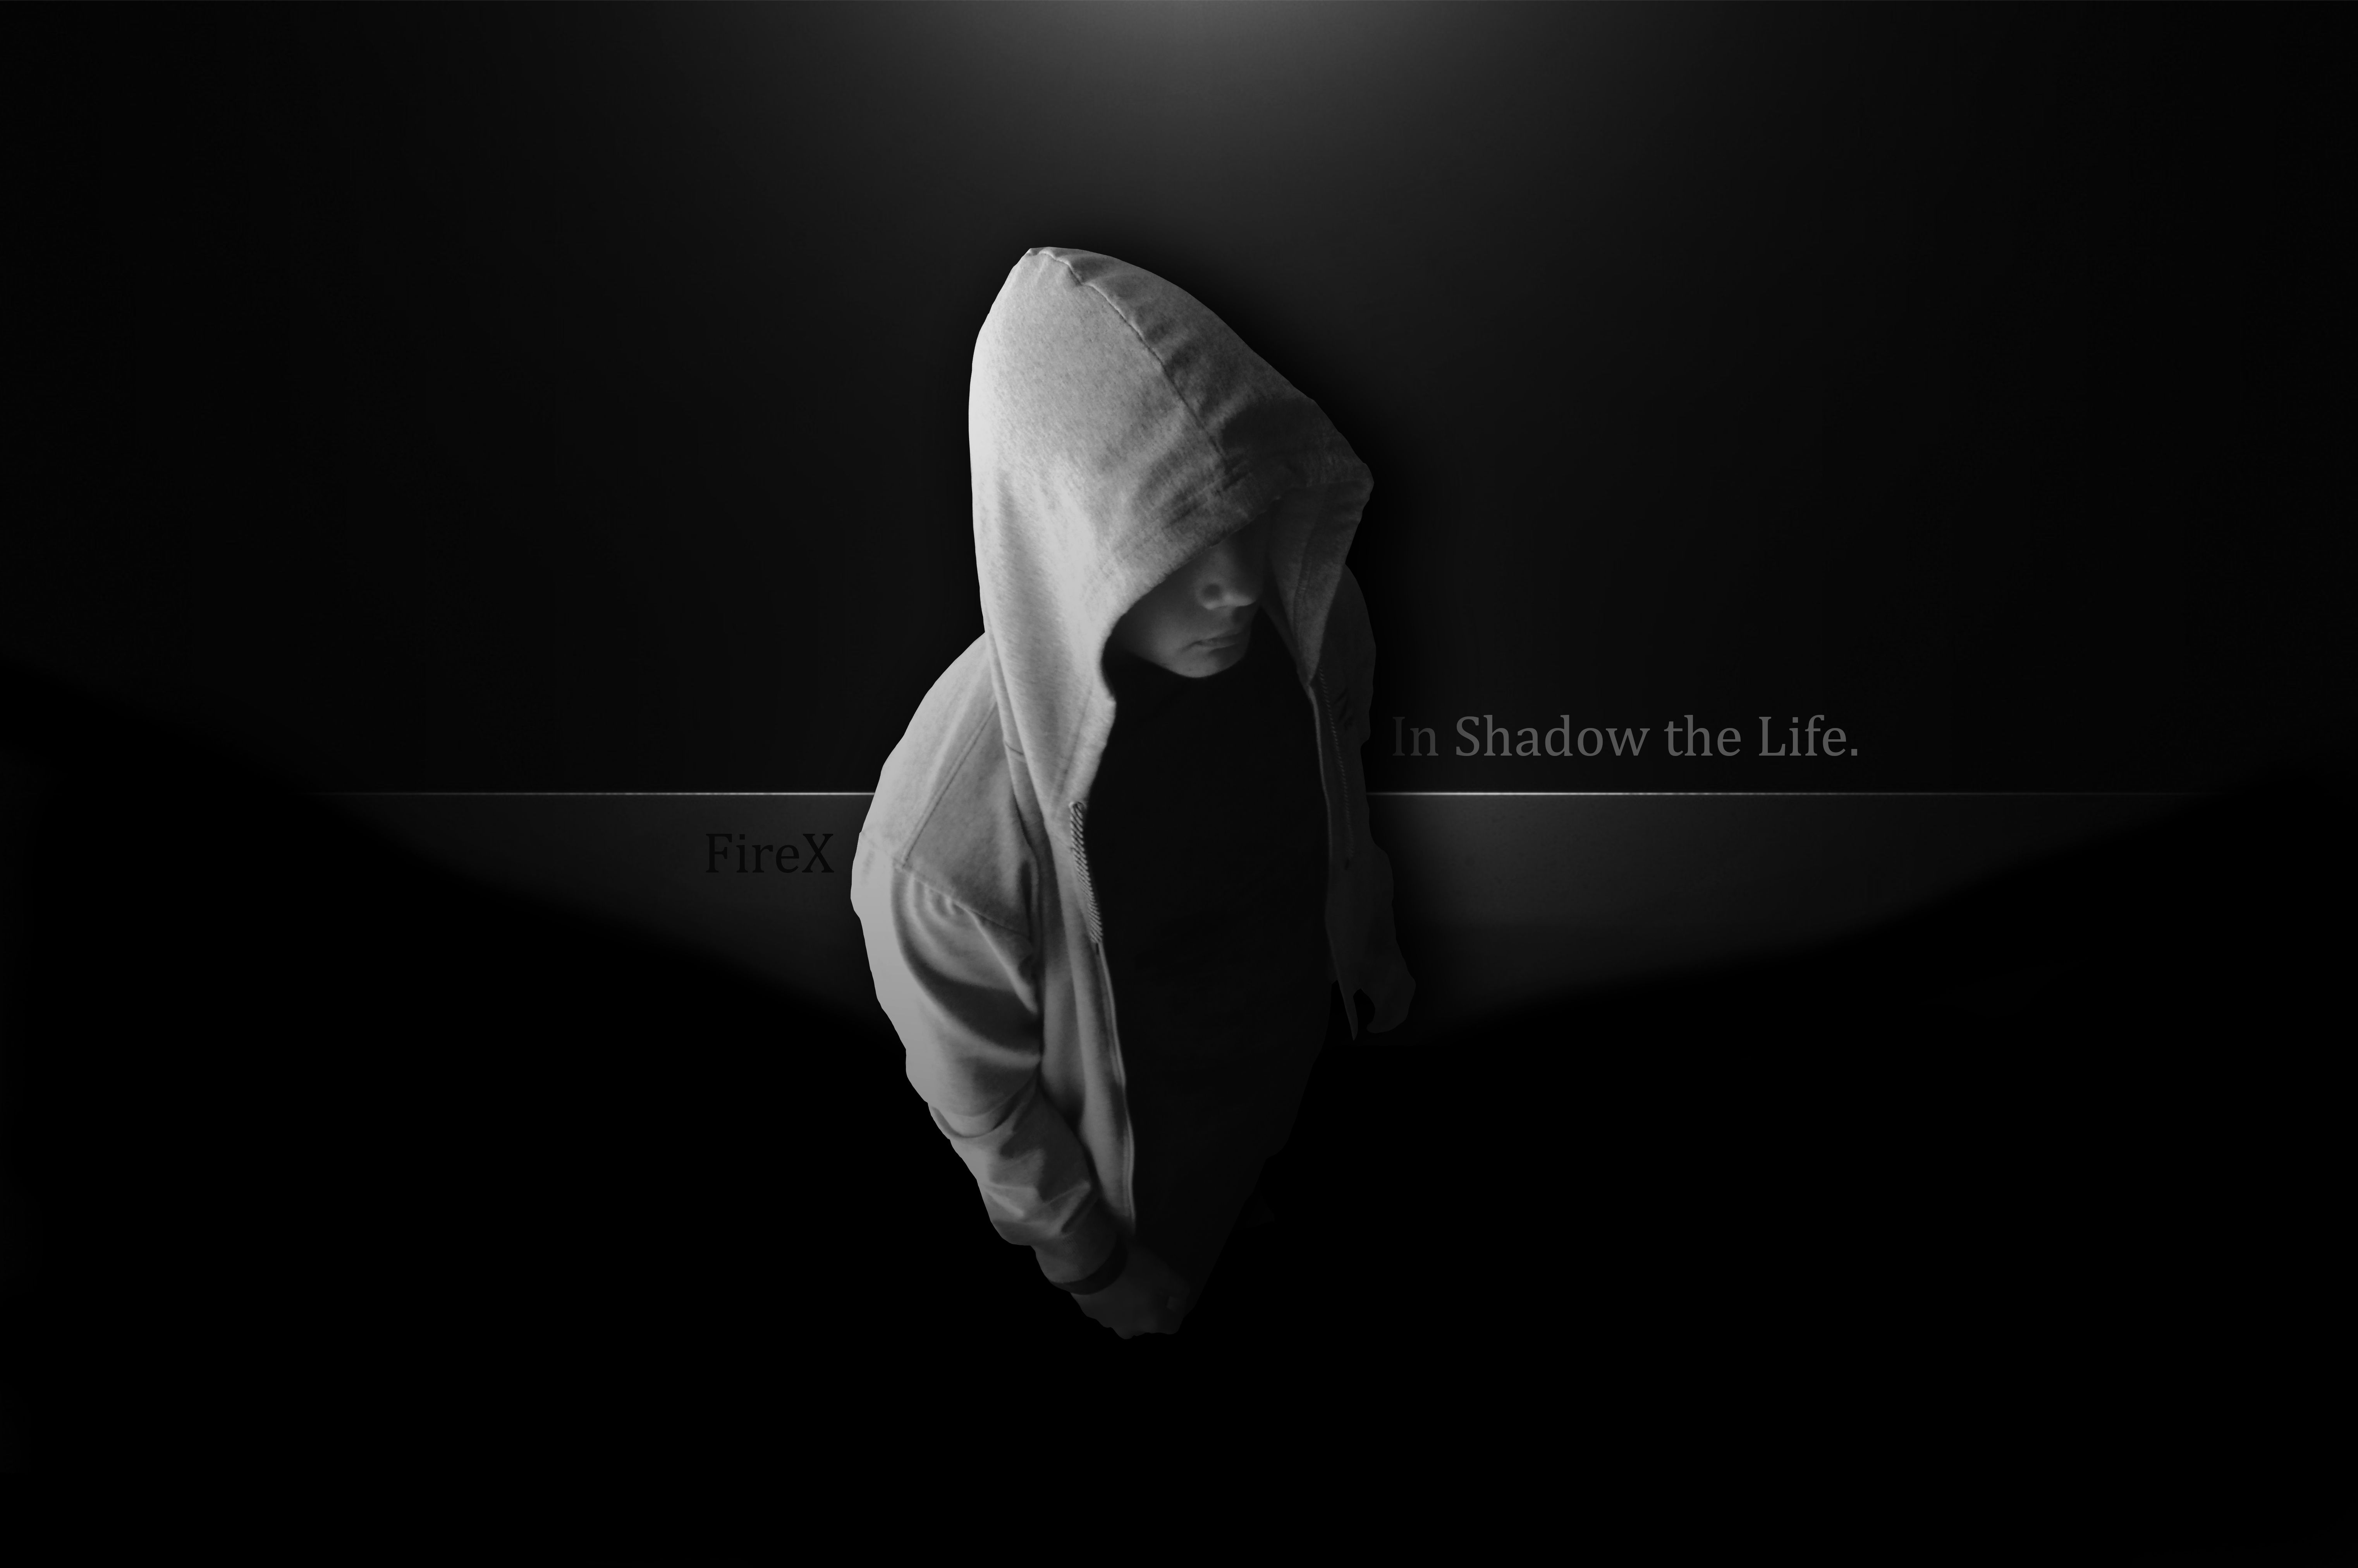 Download wallpaper darkness, people, hood, FireX, in shadow the life, section men in resolution 6088x4049